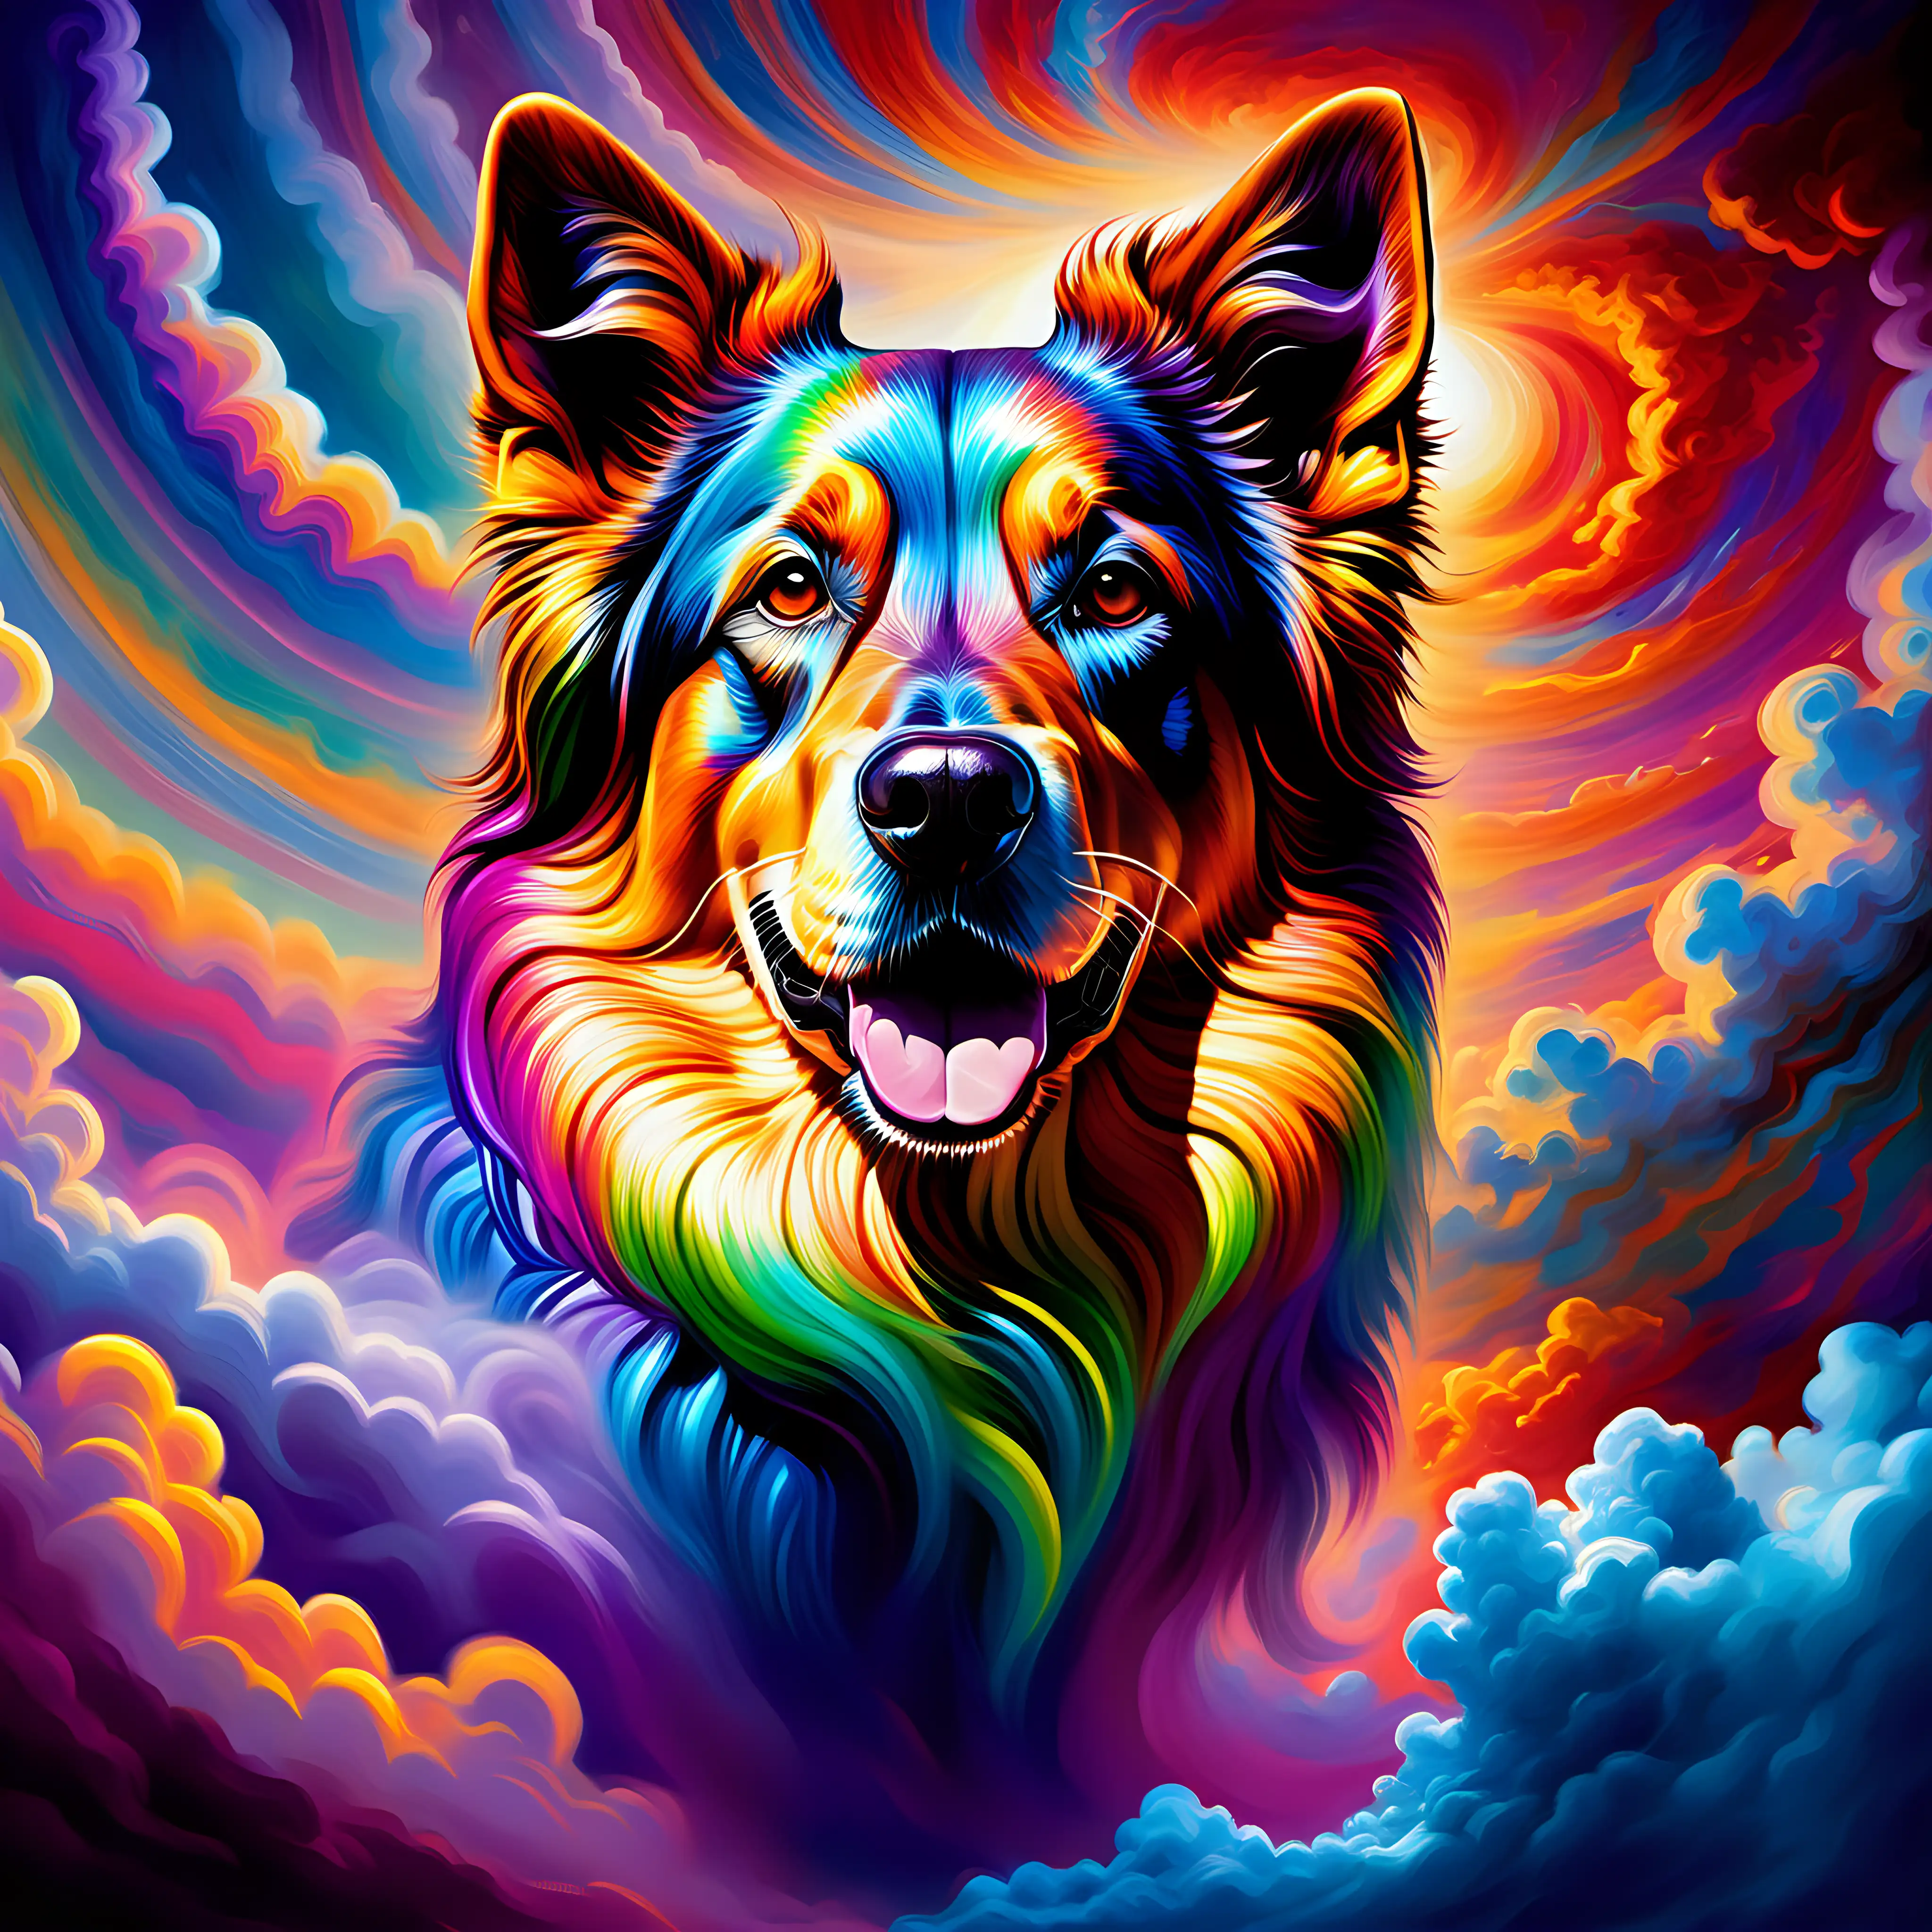 Imagine a breathtaking scene where a vibrant, multi-hued dog head emerges from a canvas of swirling, iridescent clouds. The dog head form is vividly painted with a palette of vibrant colors, emanating an aura of raw power and strength amidst the ever-shifting, kaleidoscopic clouds that surround it. Capture the essence of this majestic creature as it stands as a symbol of primal force and beauty within the mesmerizing, colorful expanse of the sky.
